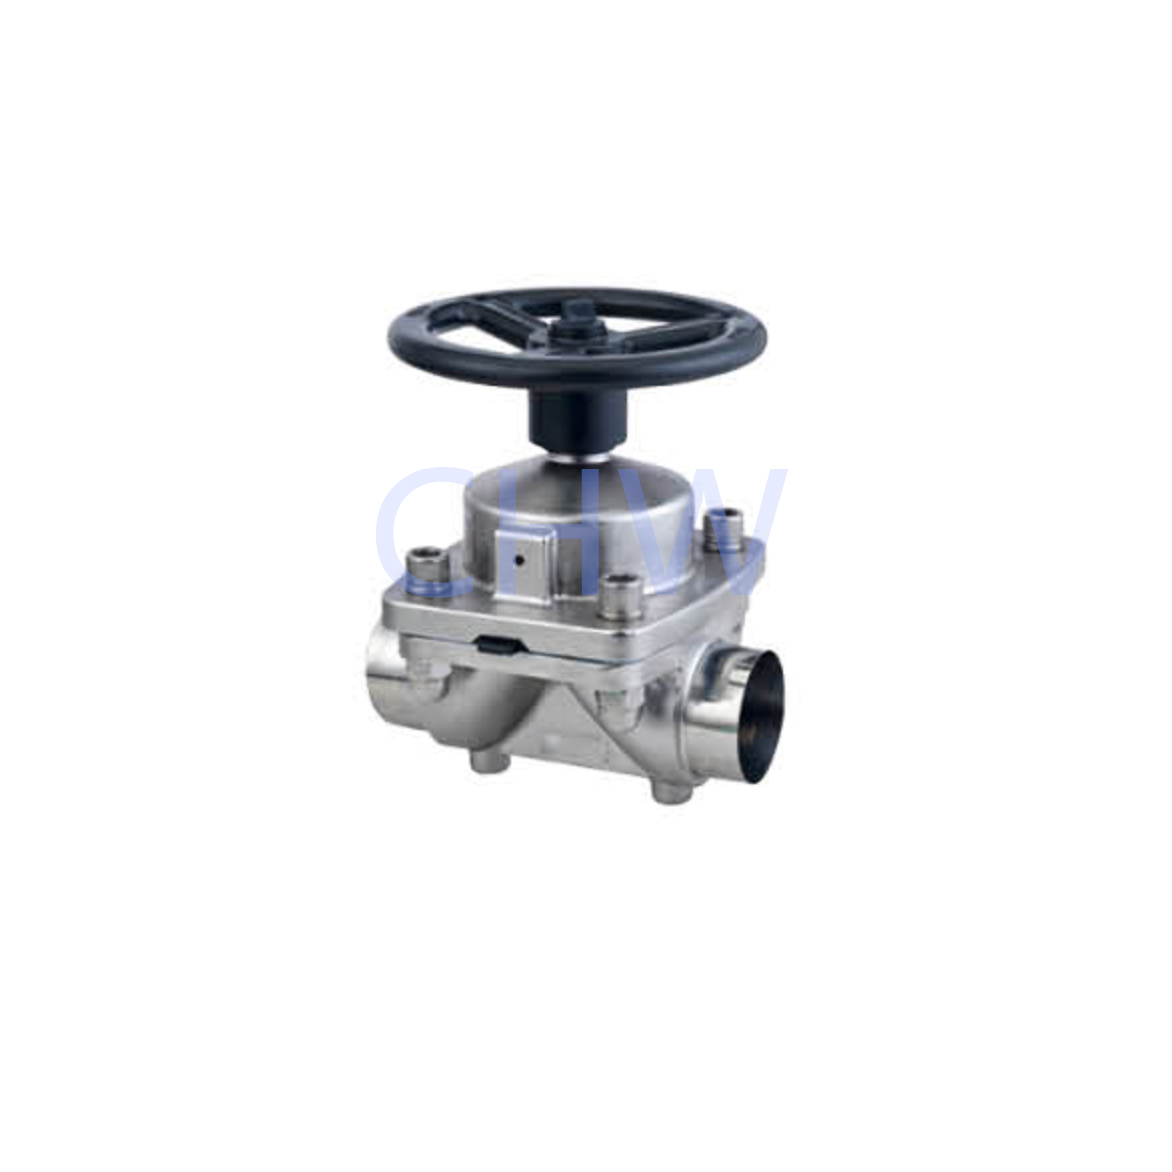 Sanitary stainless steel high quality Manual Welding Diaphragm Valve